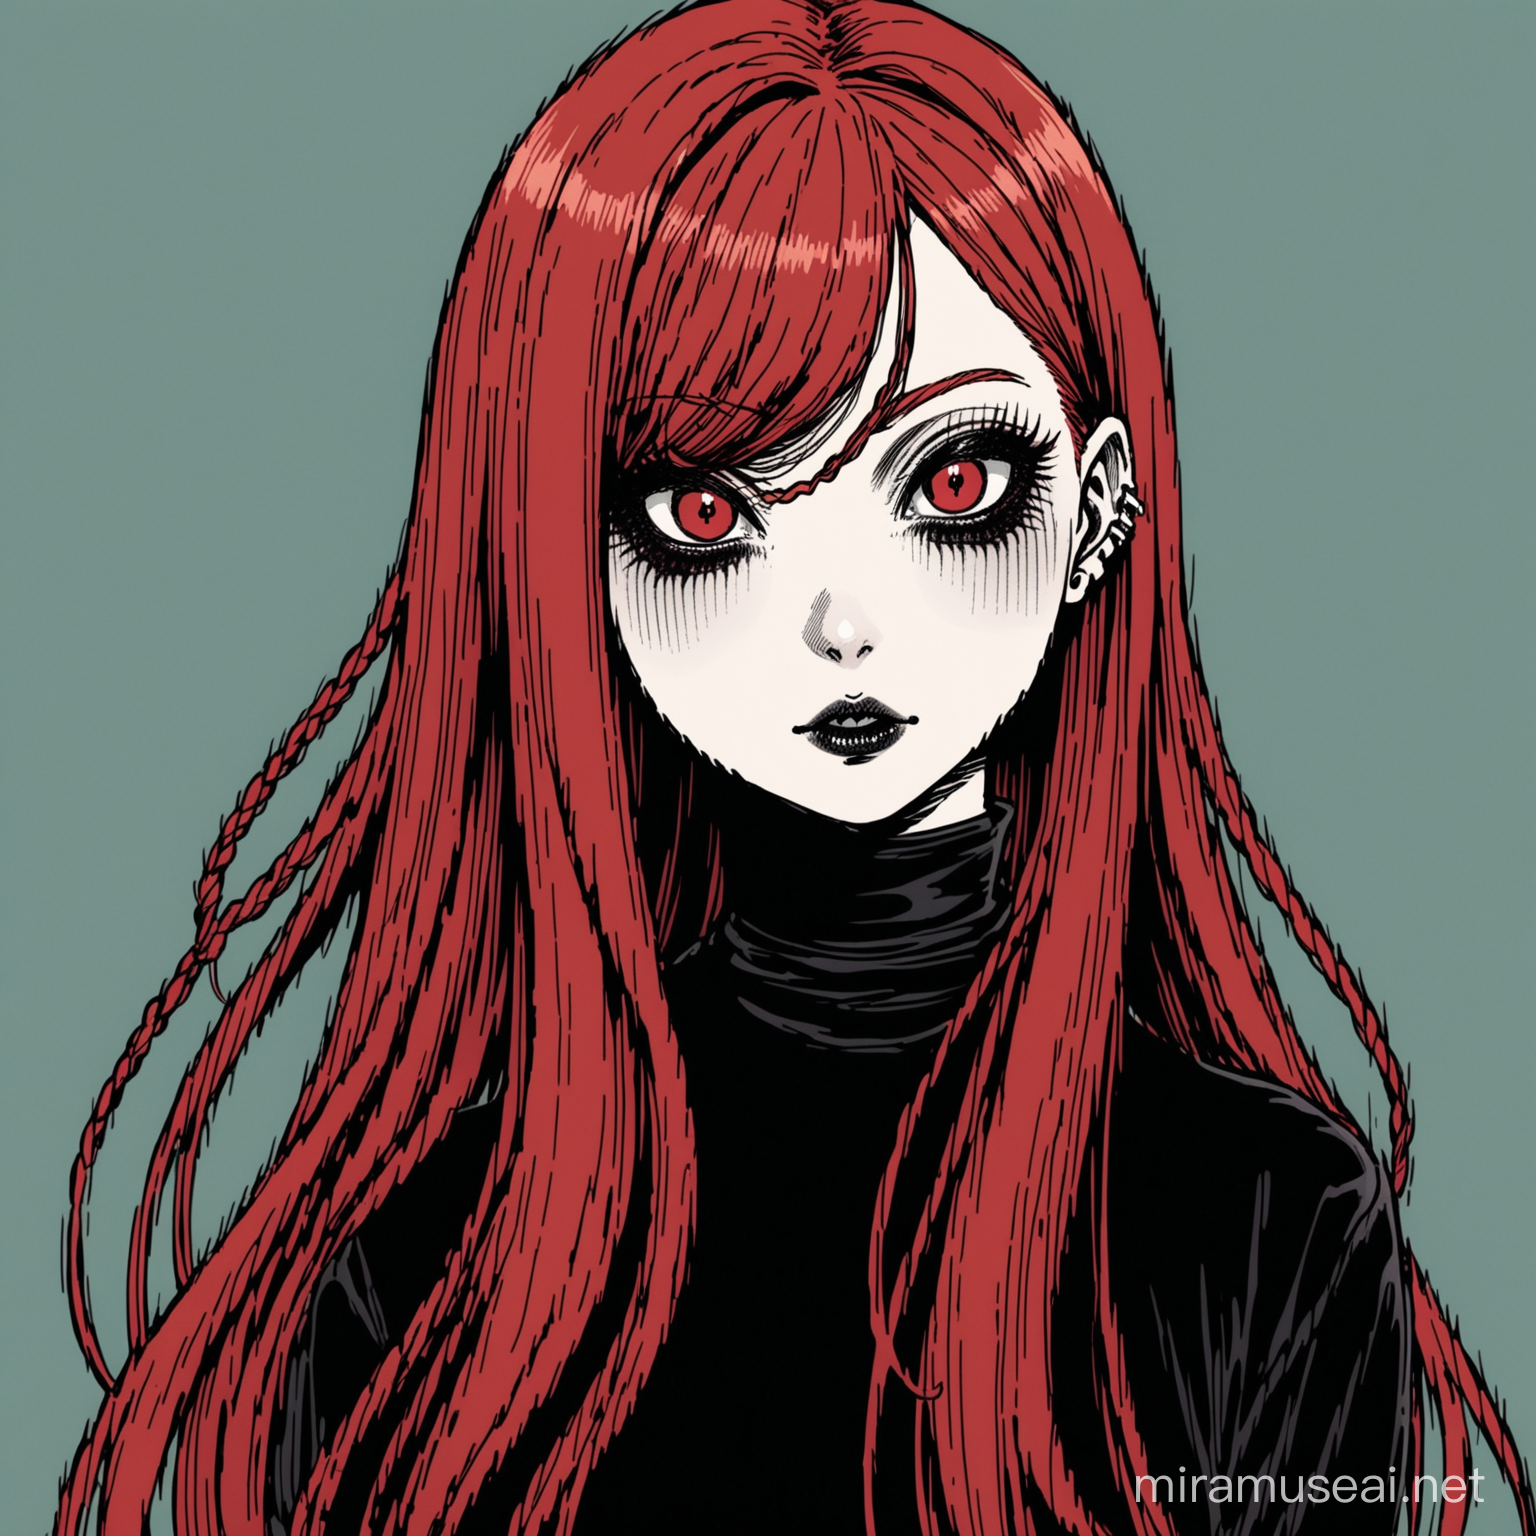 Redhead Woman with Long Hair in Junji Ito Style